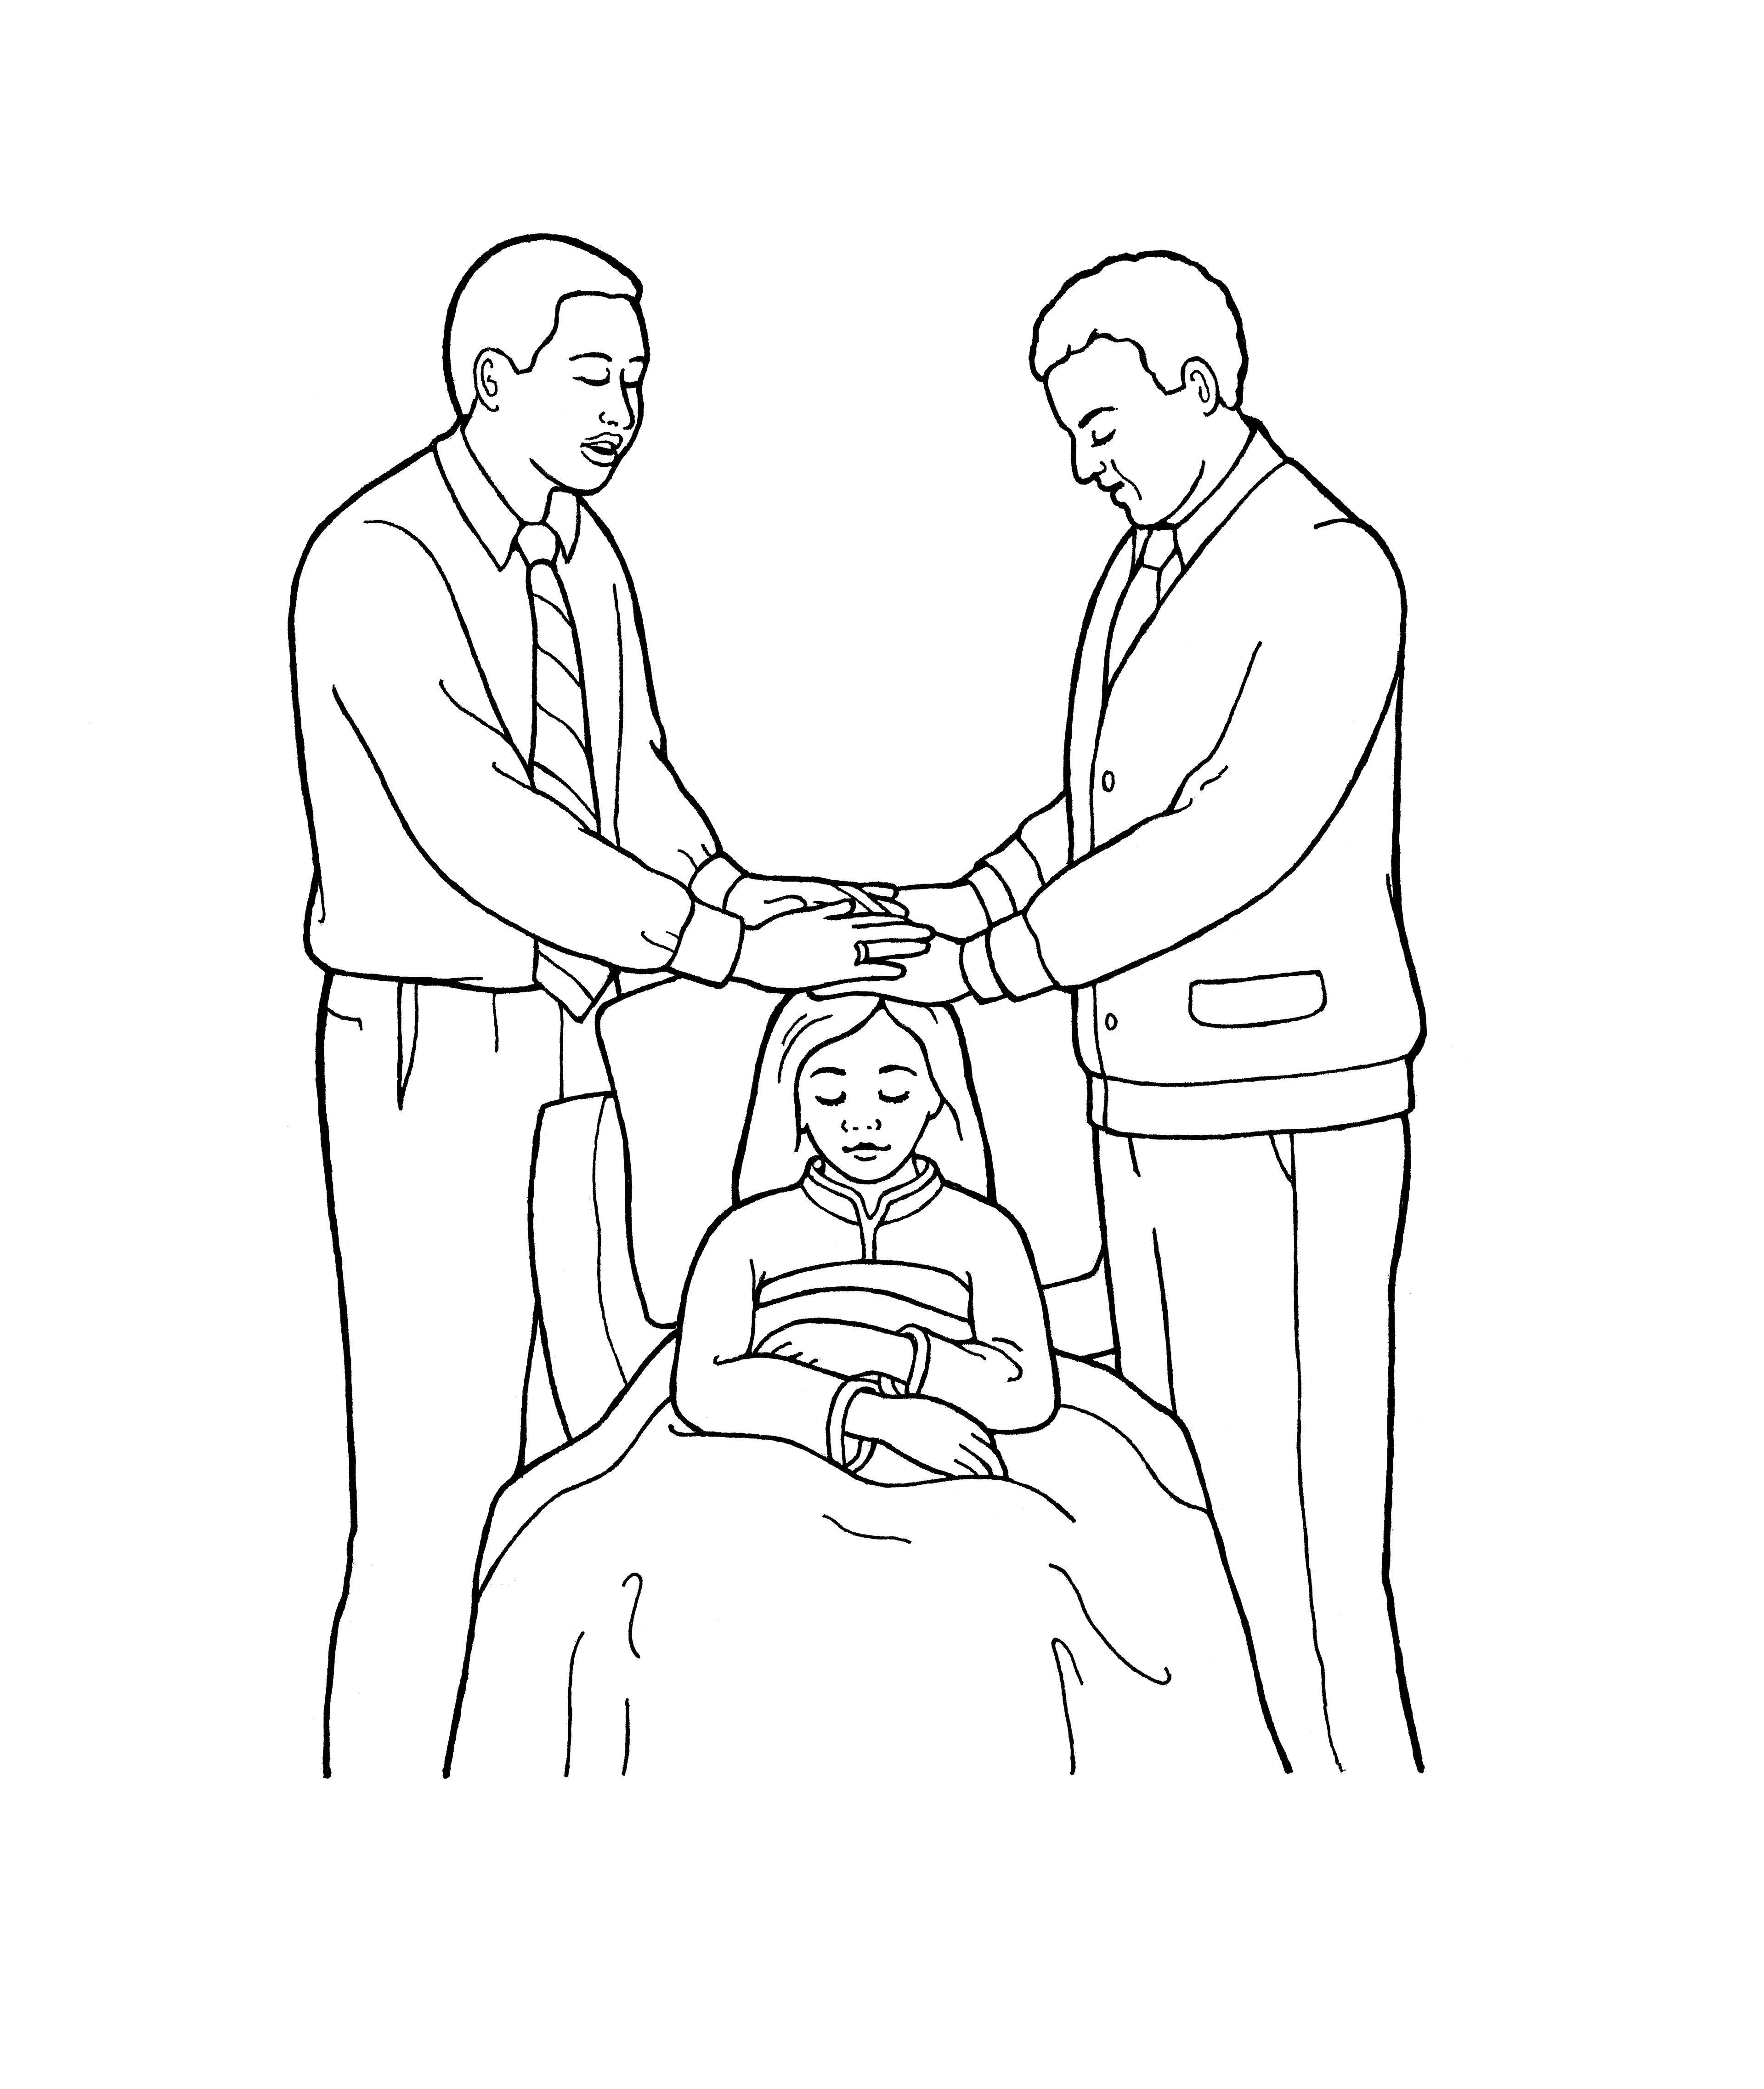 An illustration of the seventh article of faith—“Gifts” (two men giving a blessing to a sick girl).